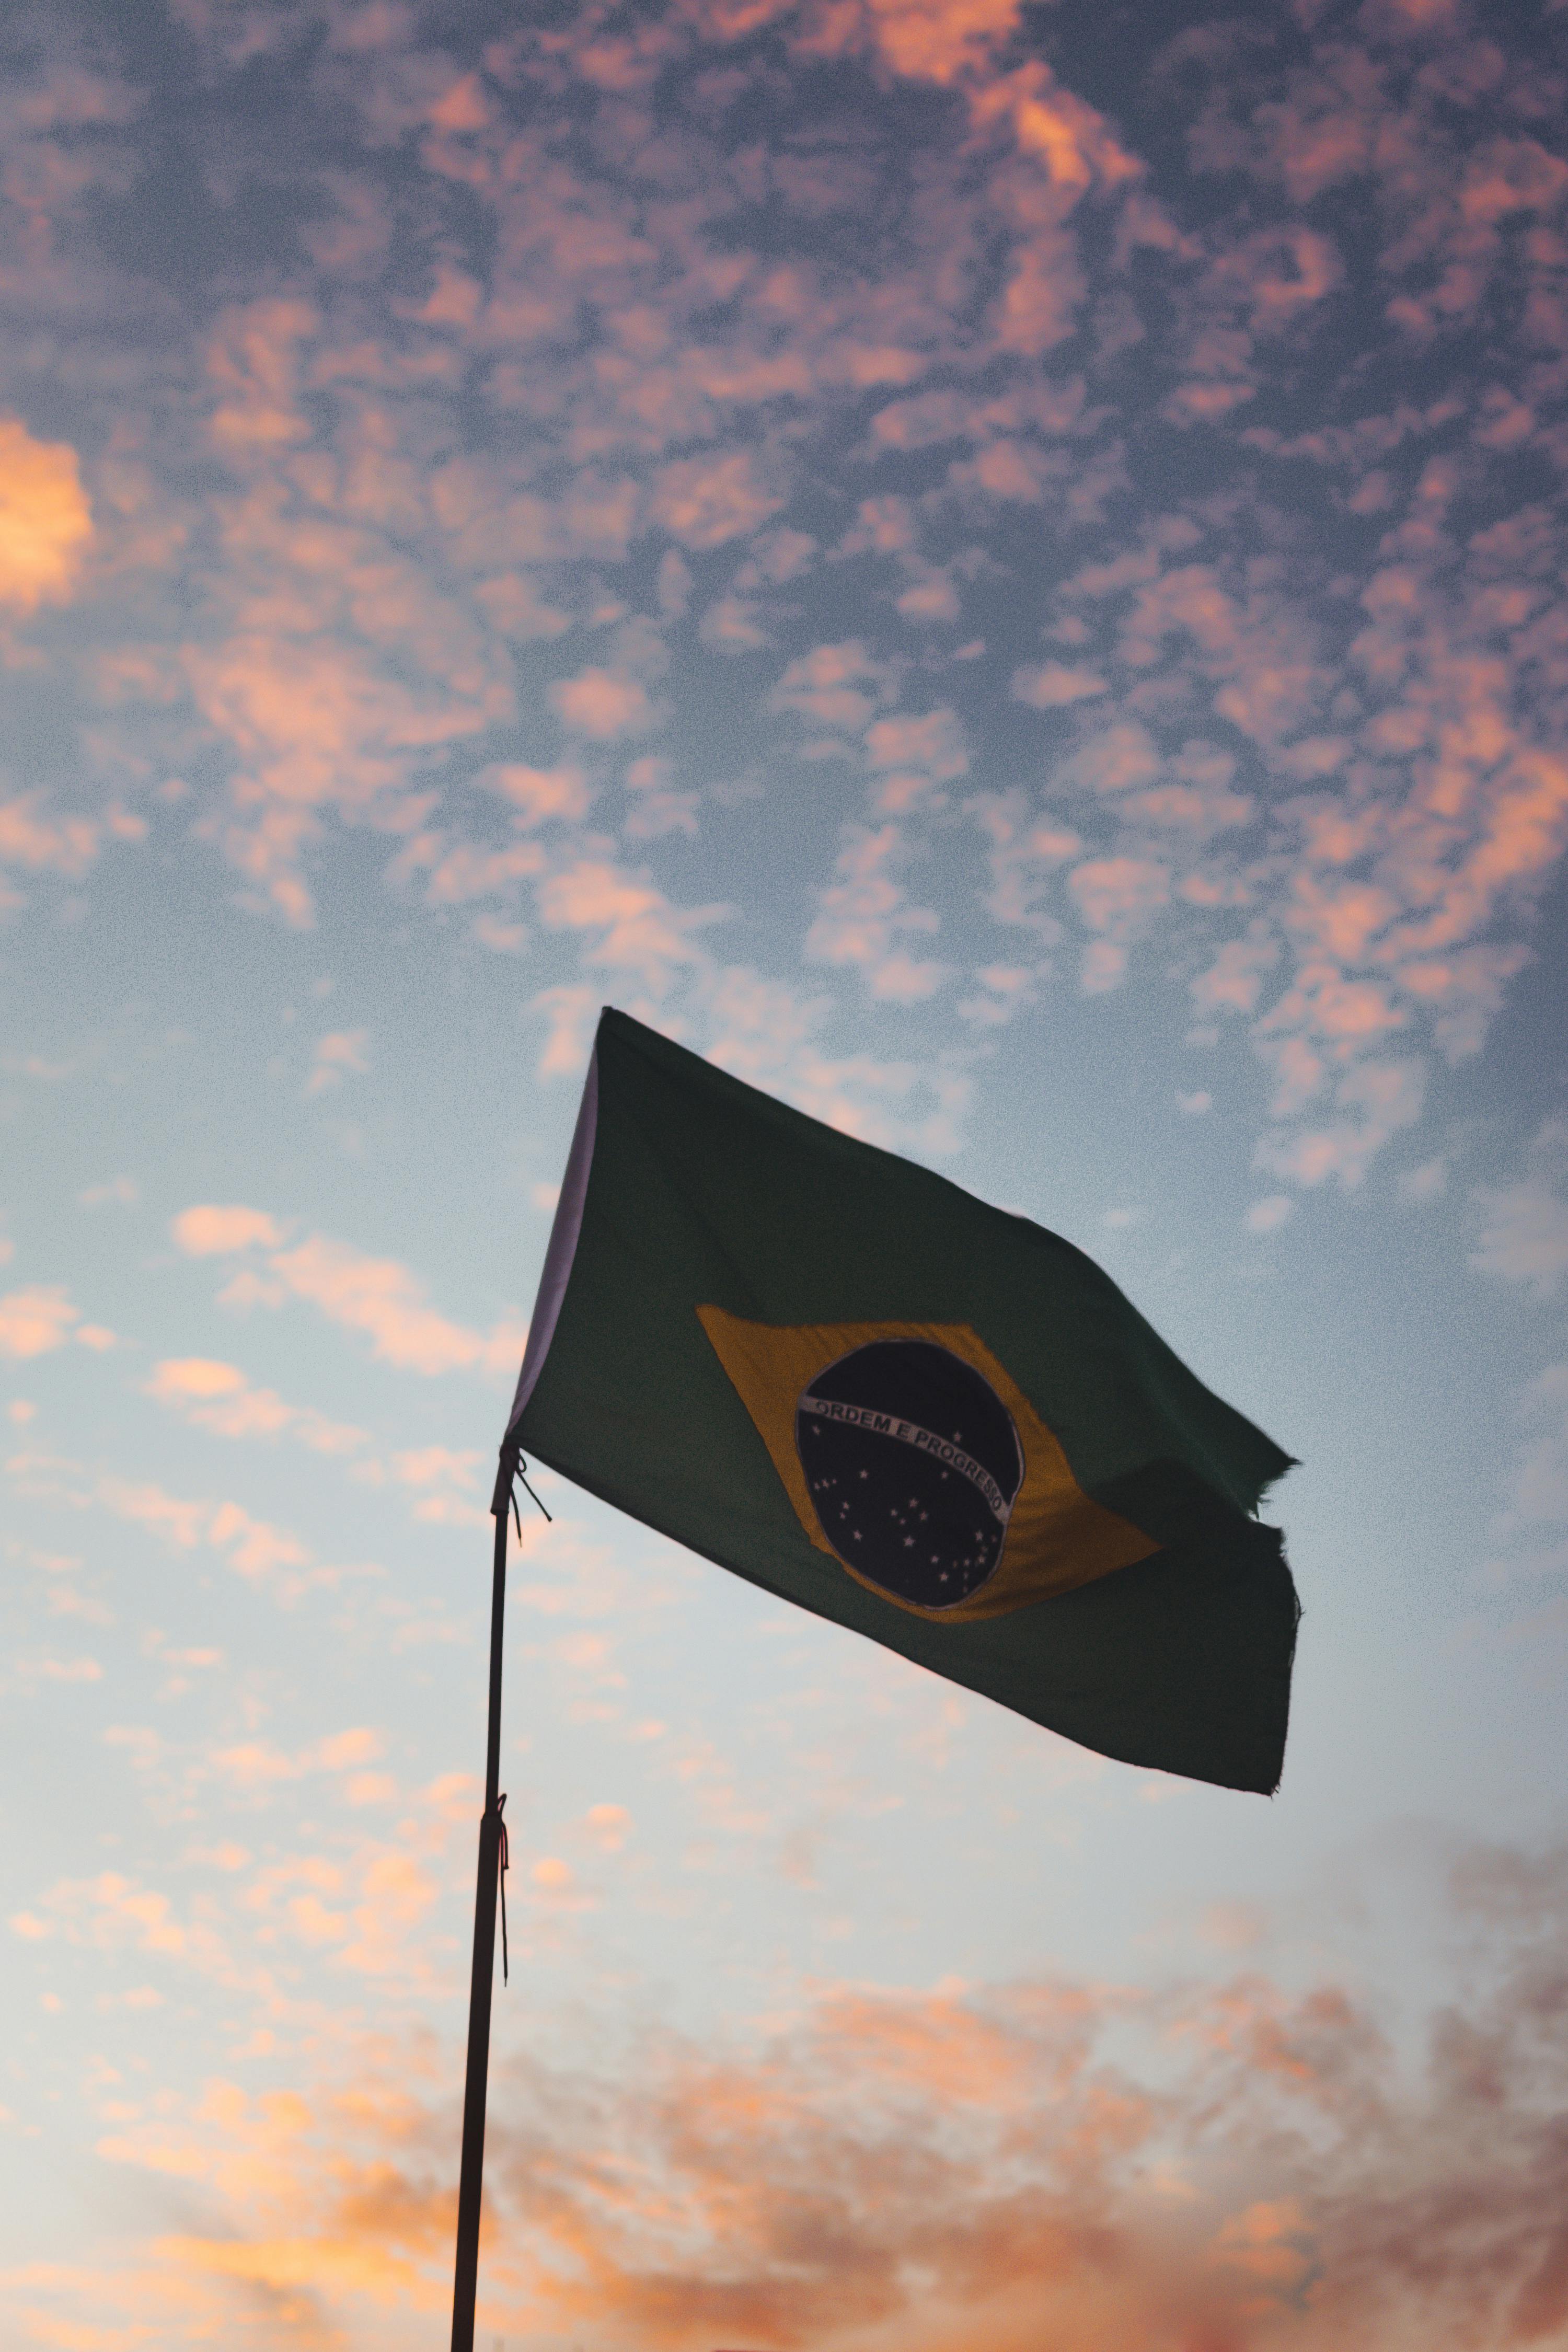 Brazil Flag Photos Download The BEST Free Brazil Flag Stock Photos  HD  Images